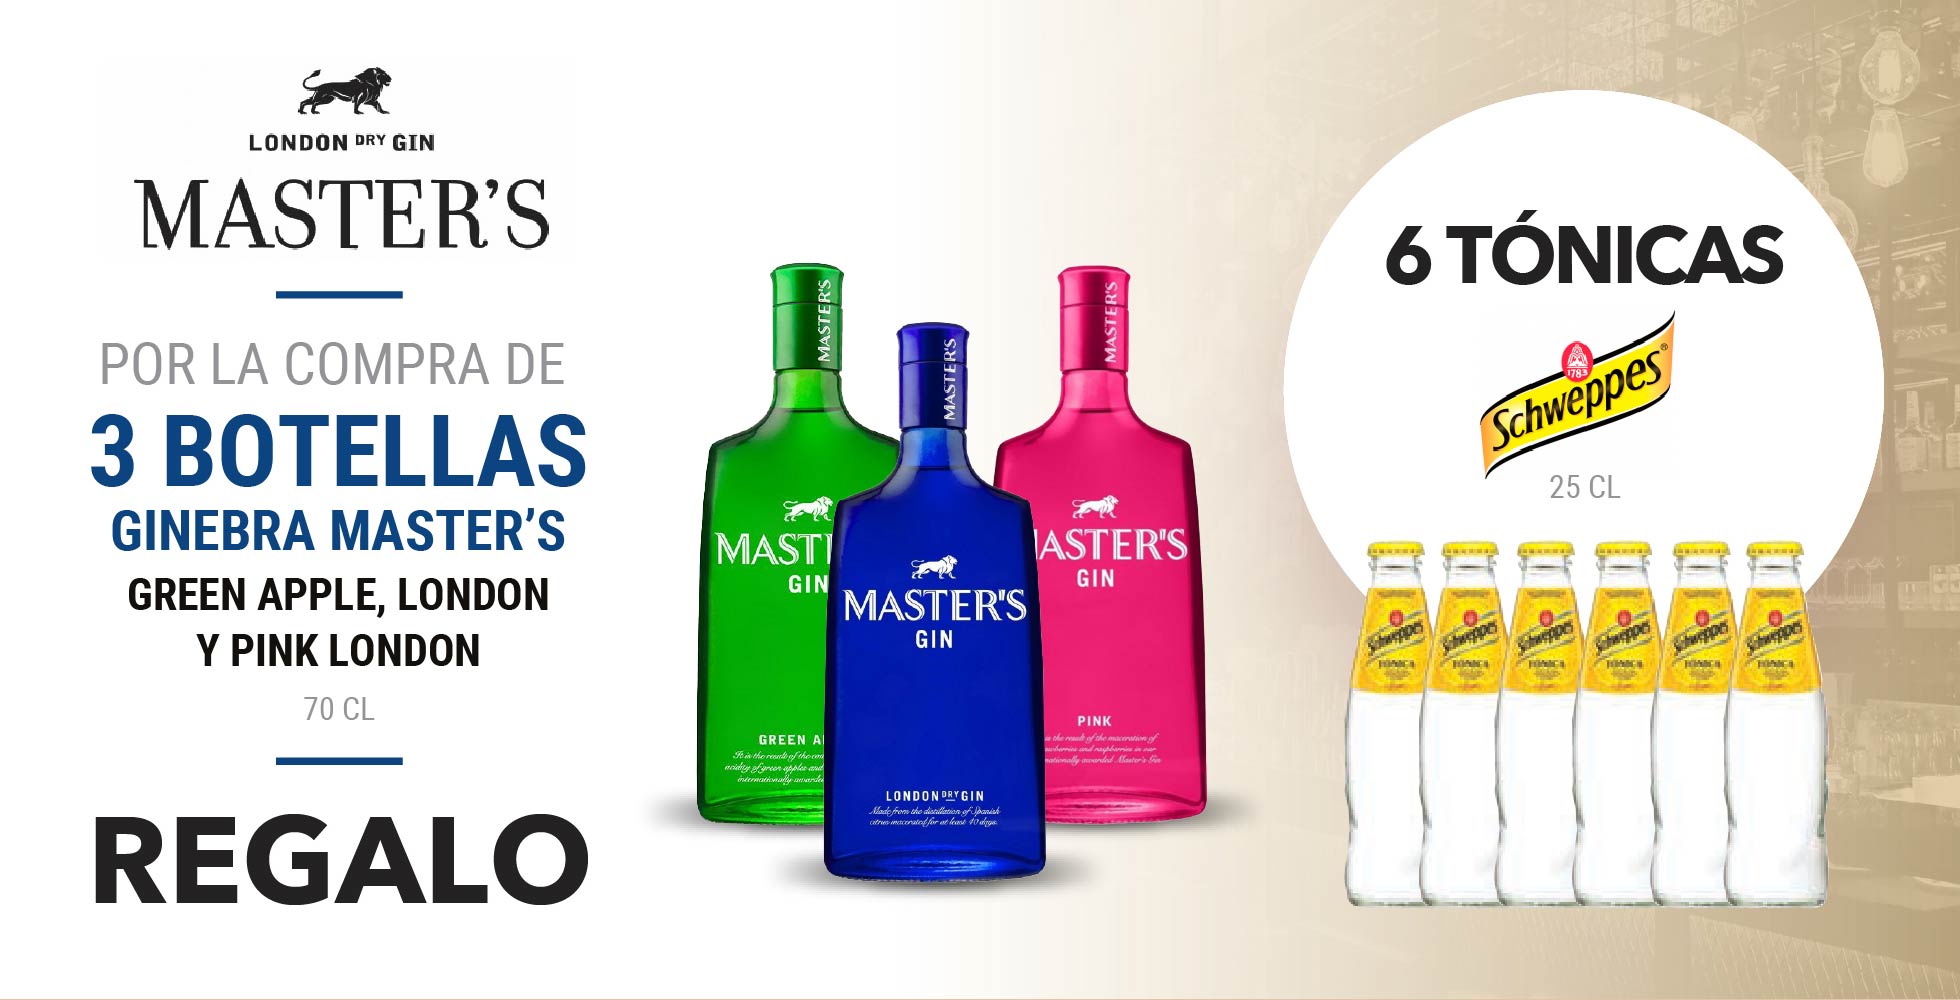 Especial London Dry Gin Master's